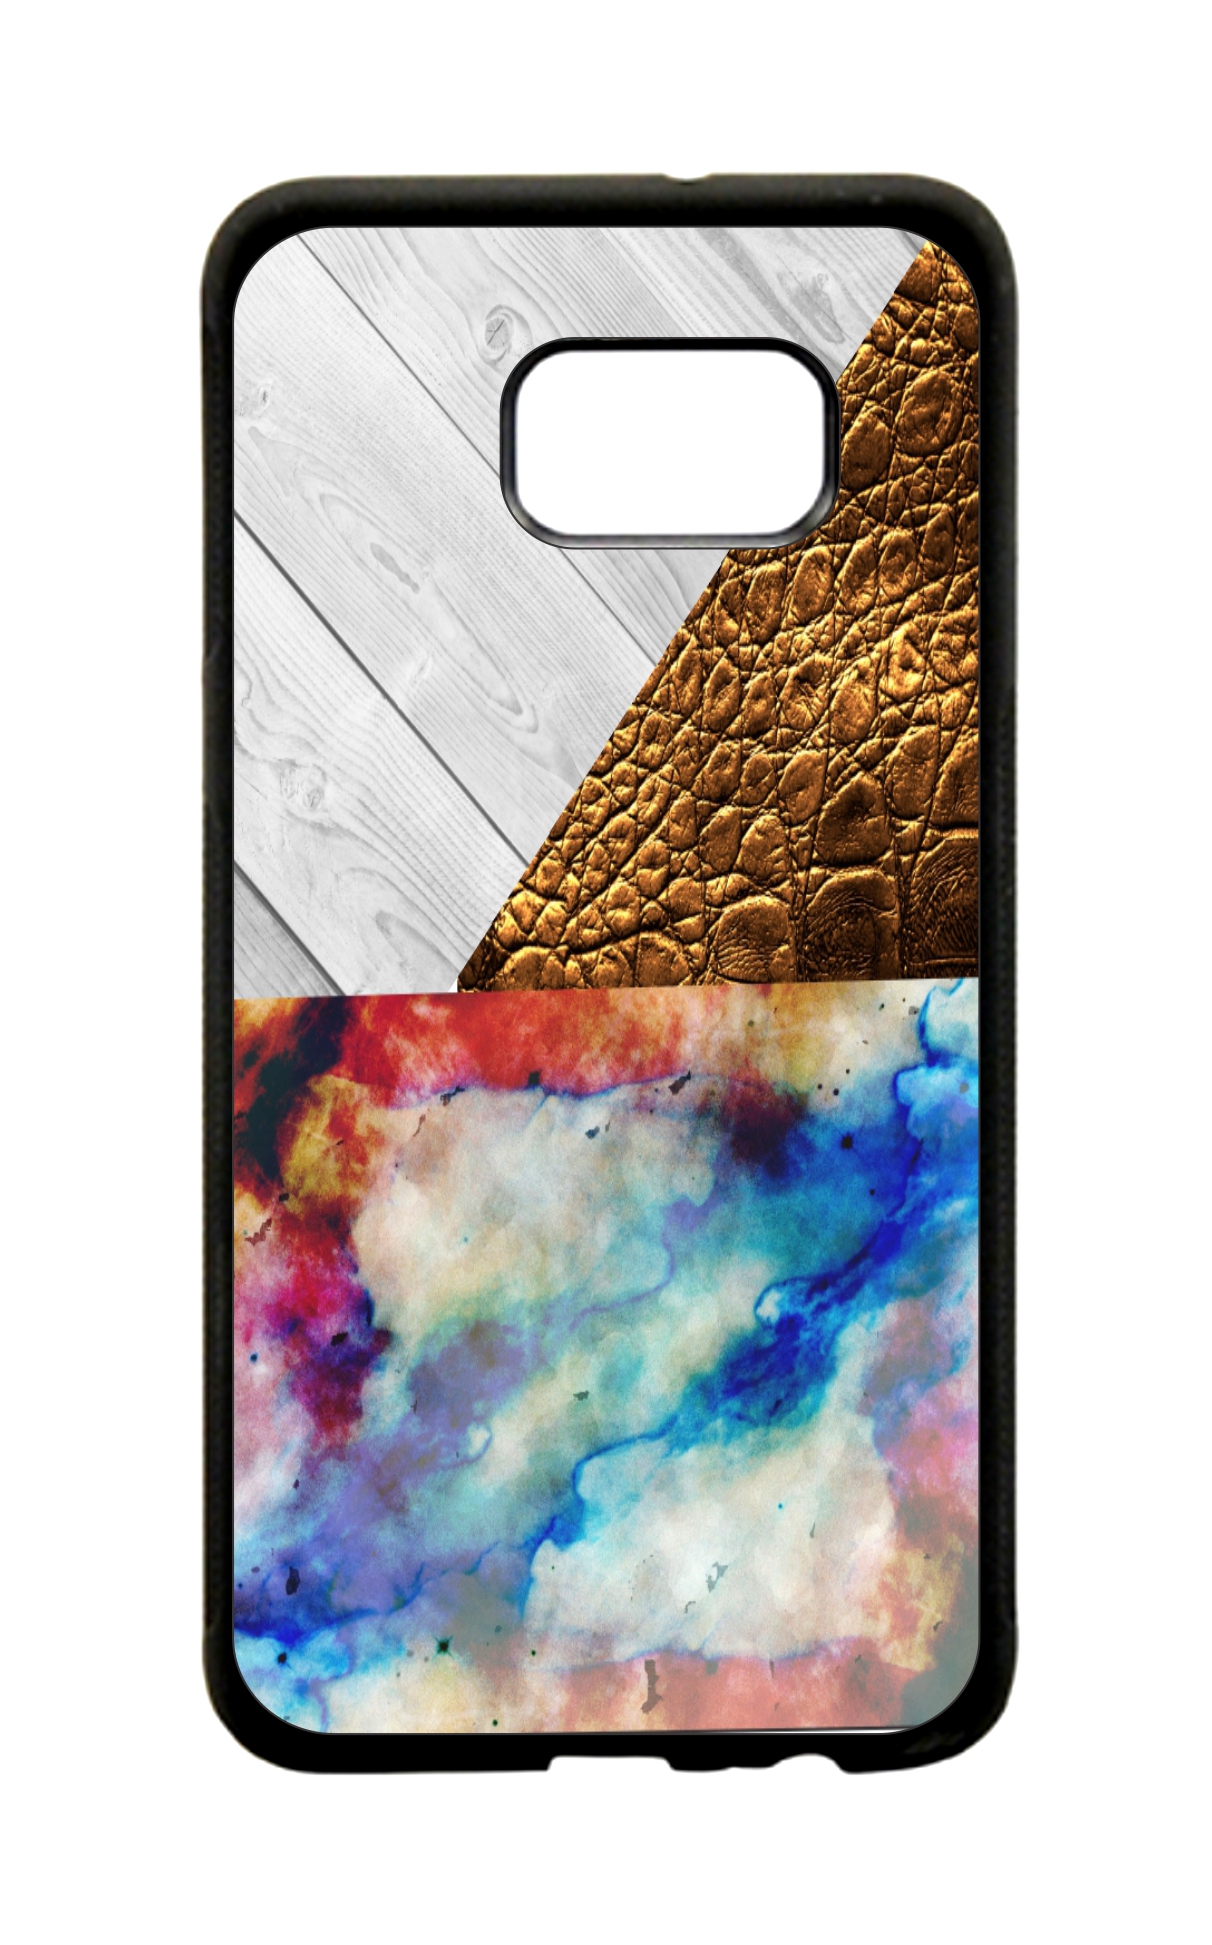 Colored Marble Faux Snakeskin and Wood Print Design Black Rubber Thin Case Cover for the Samsung Galaxy s7 - Samsung Galaxys7 Accessories - s7 Phone Case - image 1 of 3